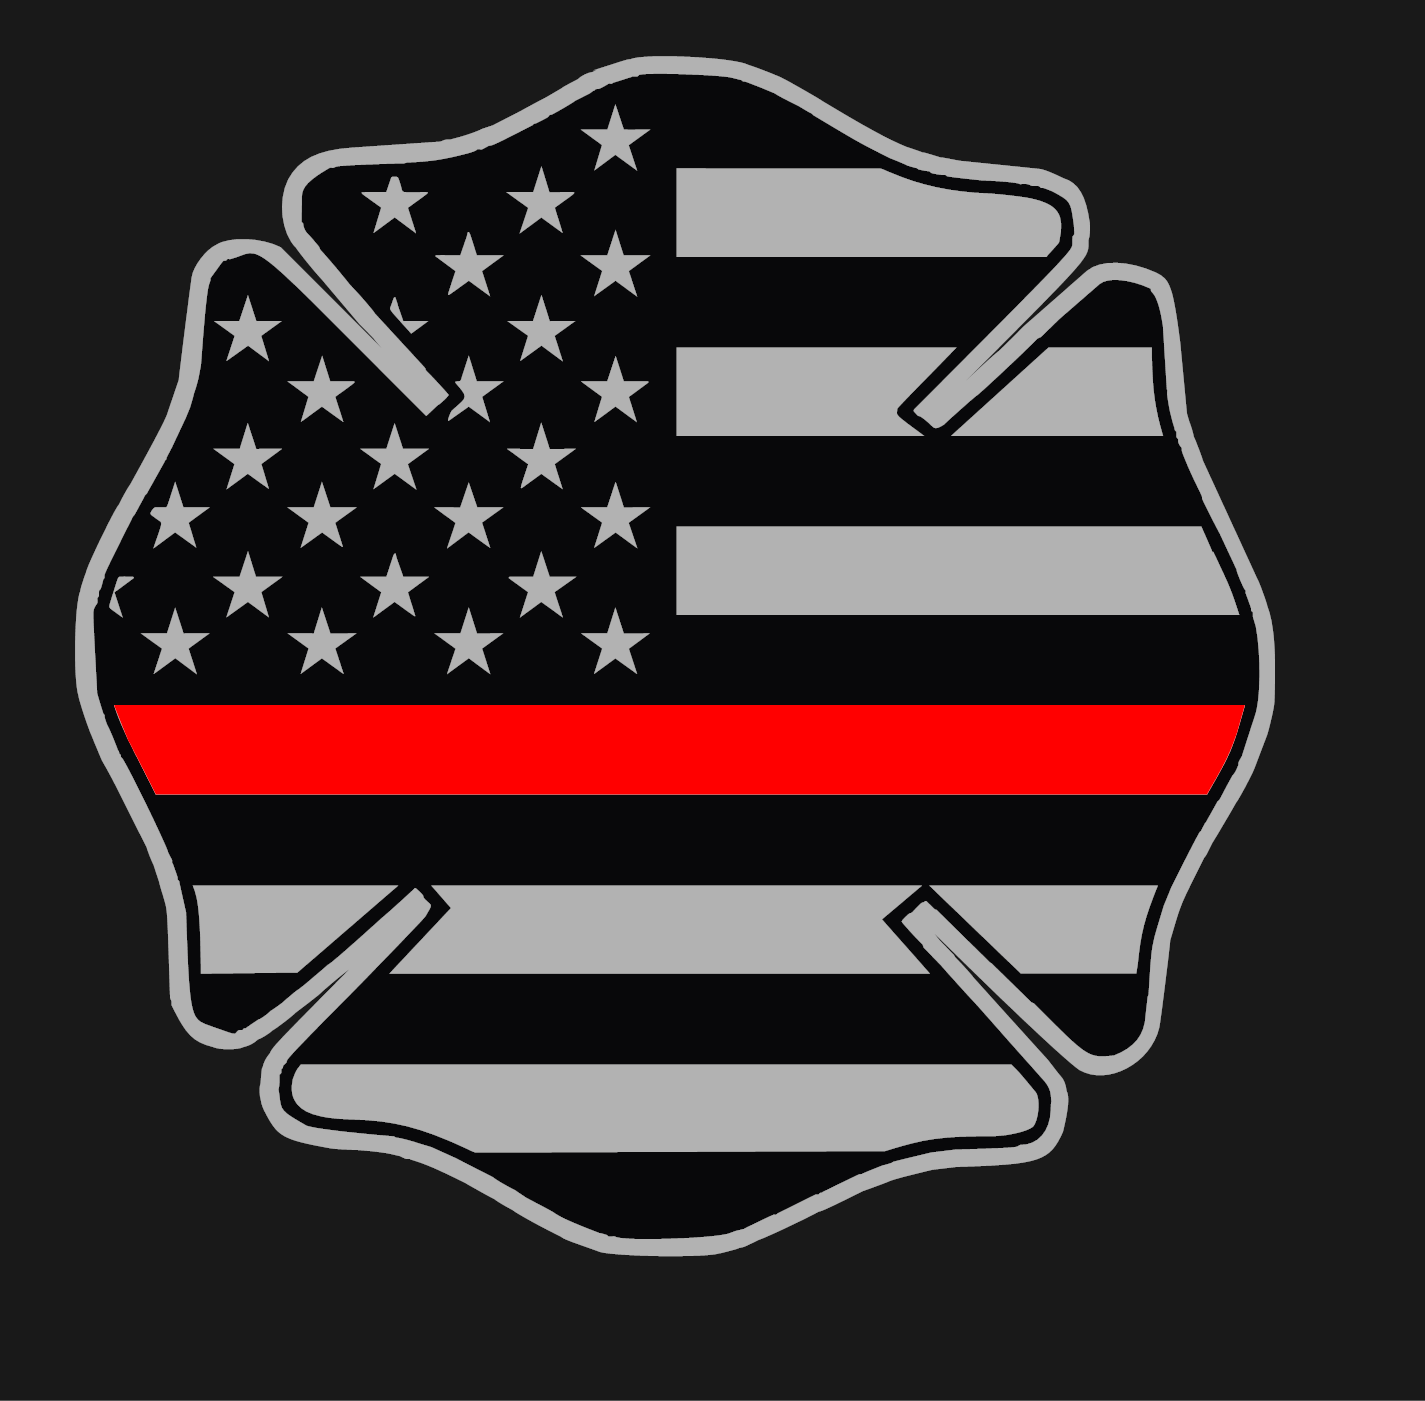 Firefighter Tribute Decal: Thin Red Line Maltese Cross USA Flag